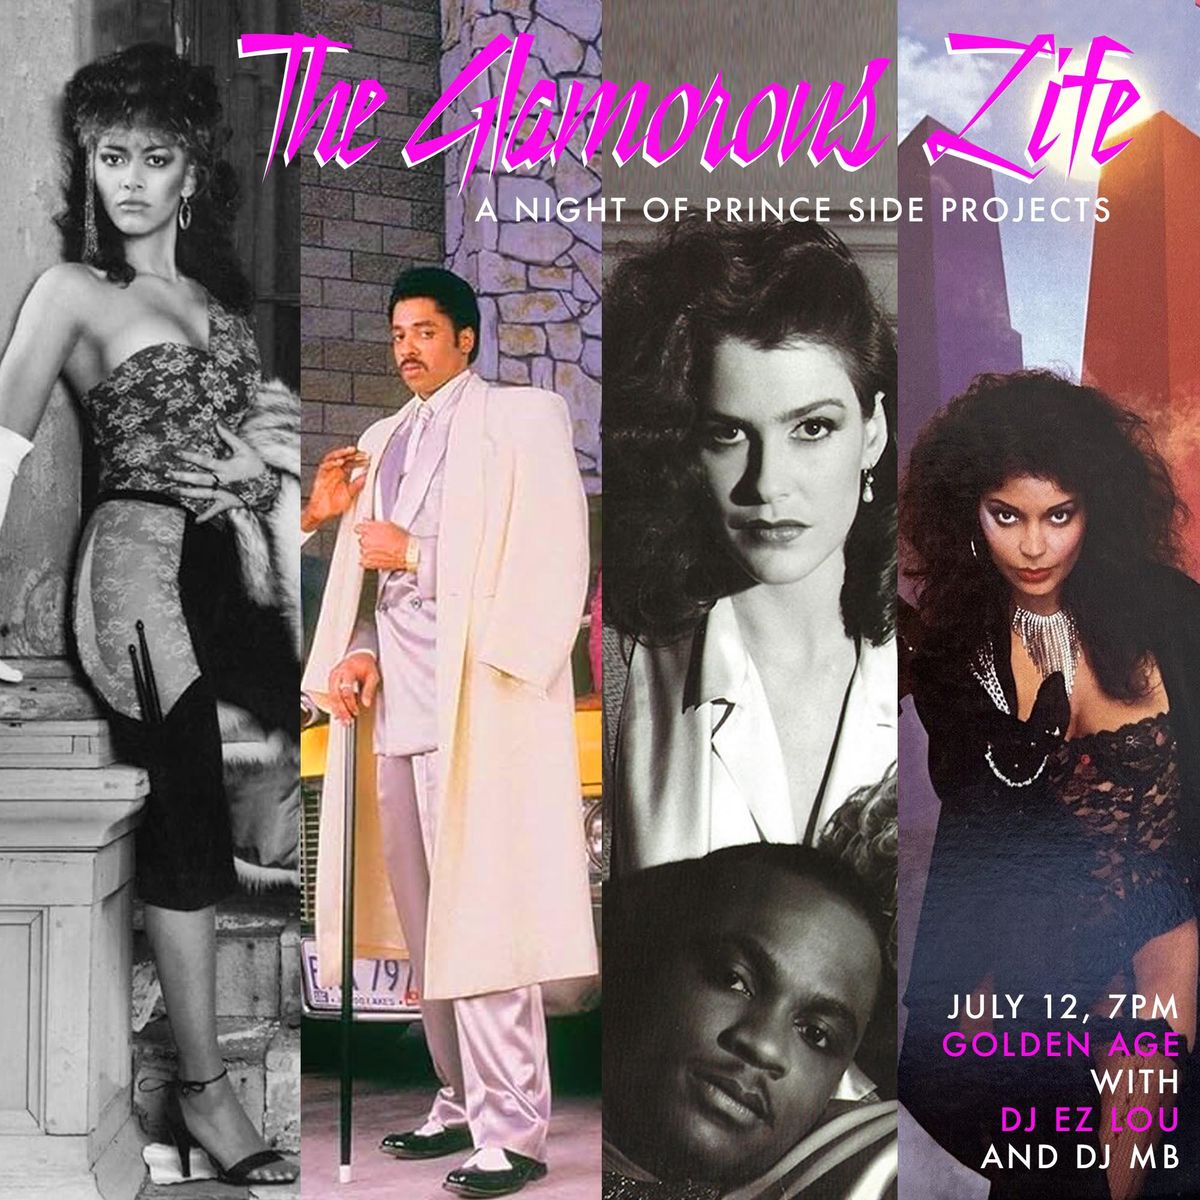 The Glamorous Life: A Night of Prince Side Projects